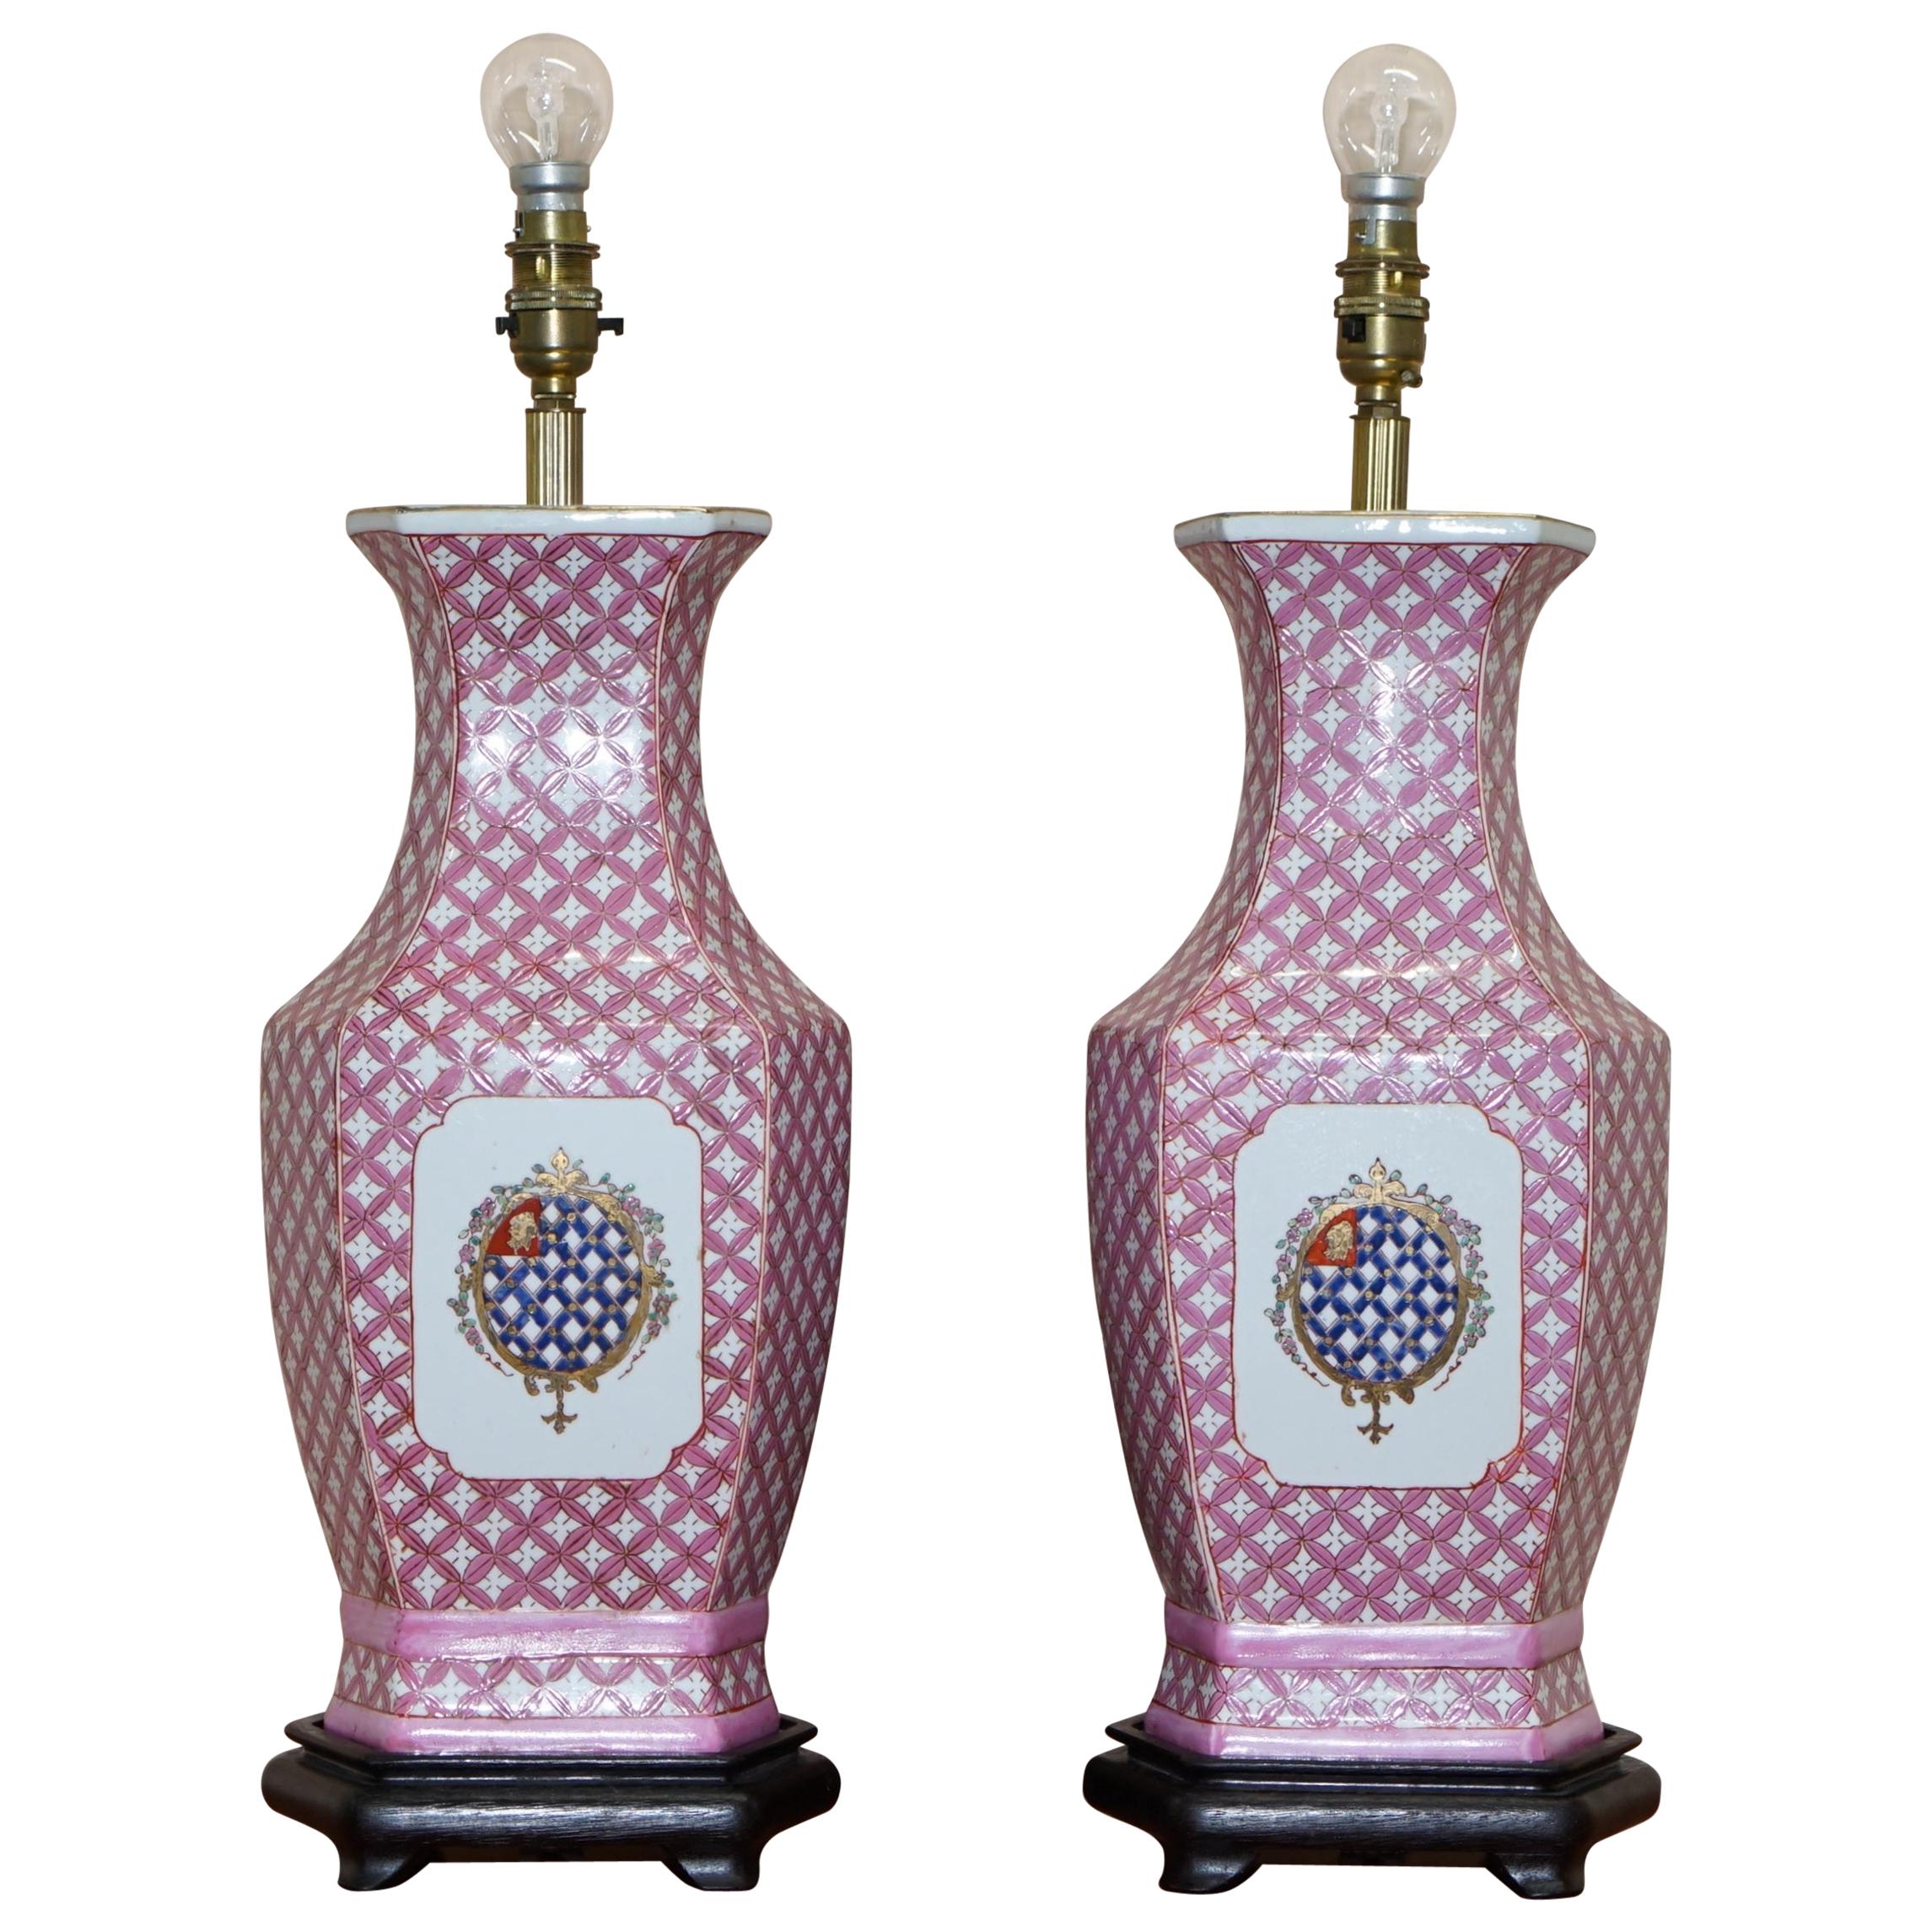 Pair of Chinese Style Ceramic Table Lamps with Gold Leaf Gilding from Tindle